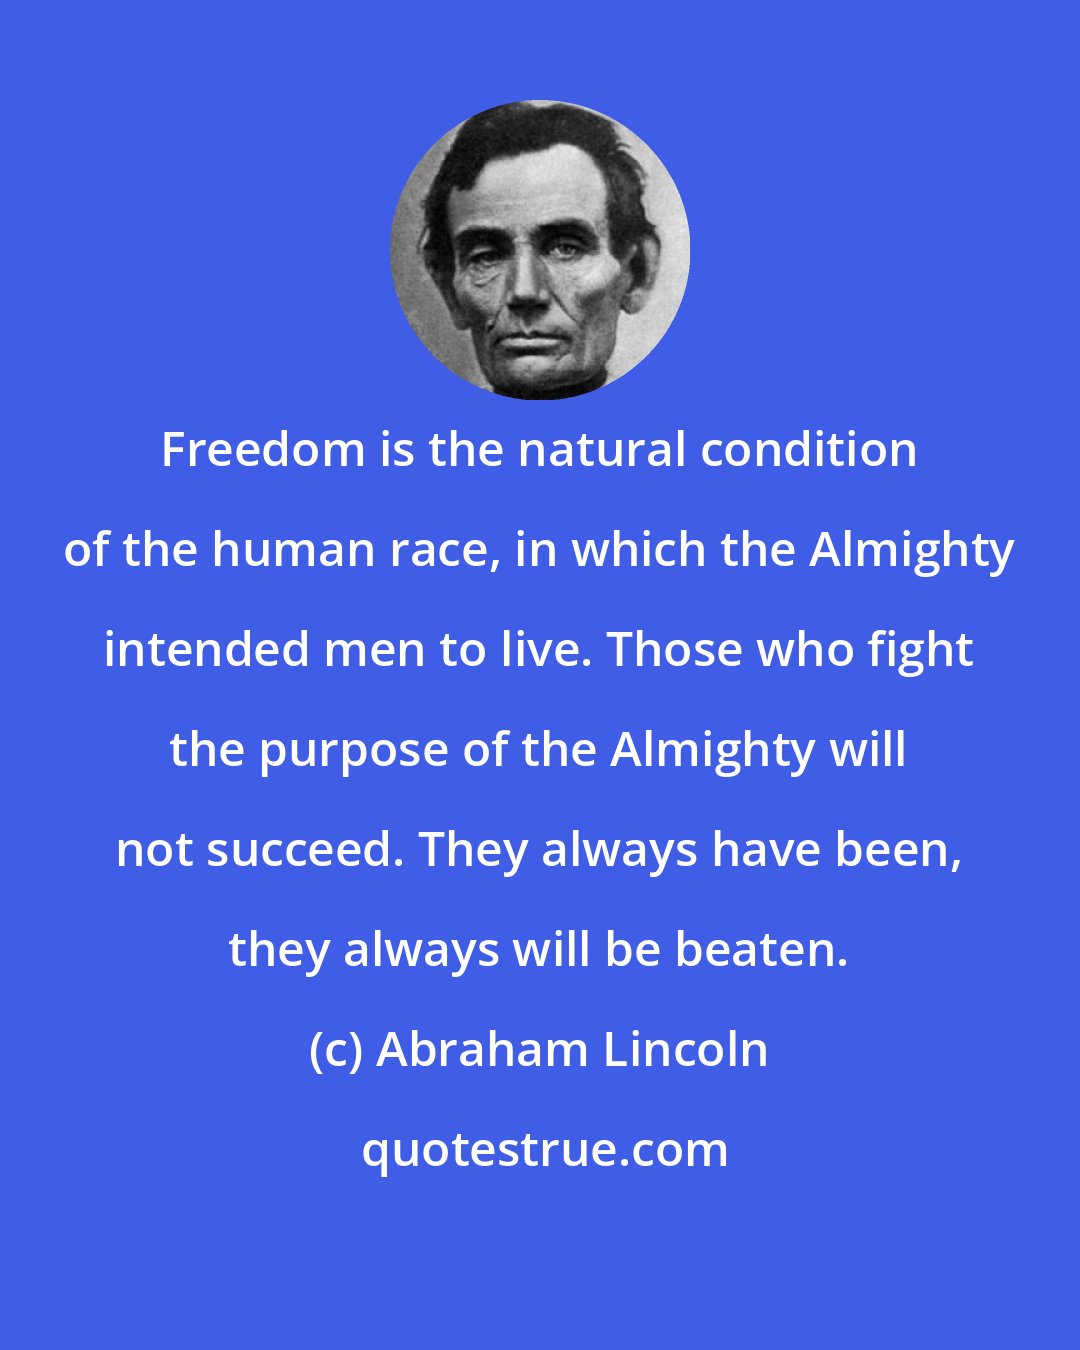 Abraham Lincoln: Freedom is the natural condition of the human race, in which the Almighty intended men to live. Those who fight the purpose of the Almighty will not succeed. They always have been, they always will be beaten.